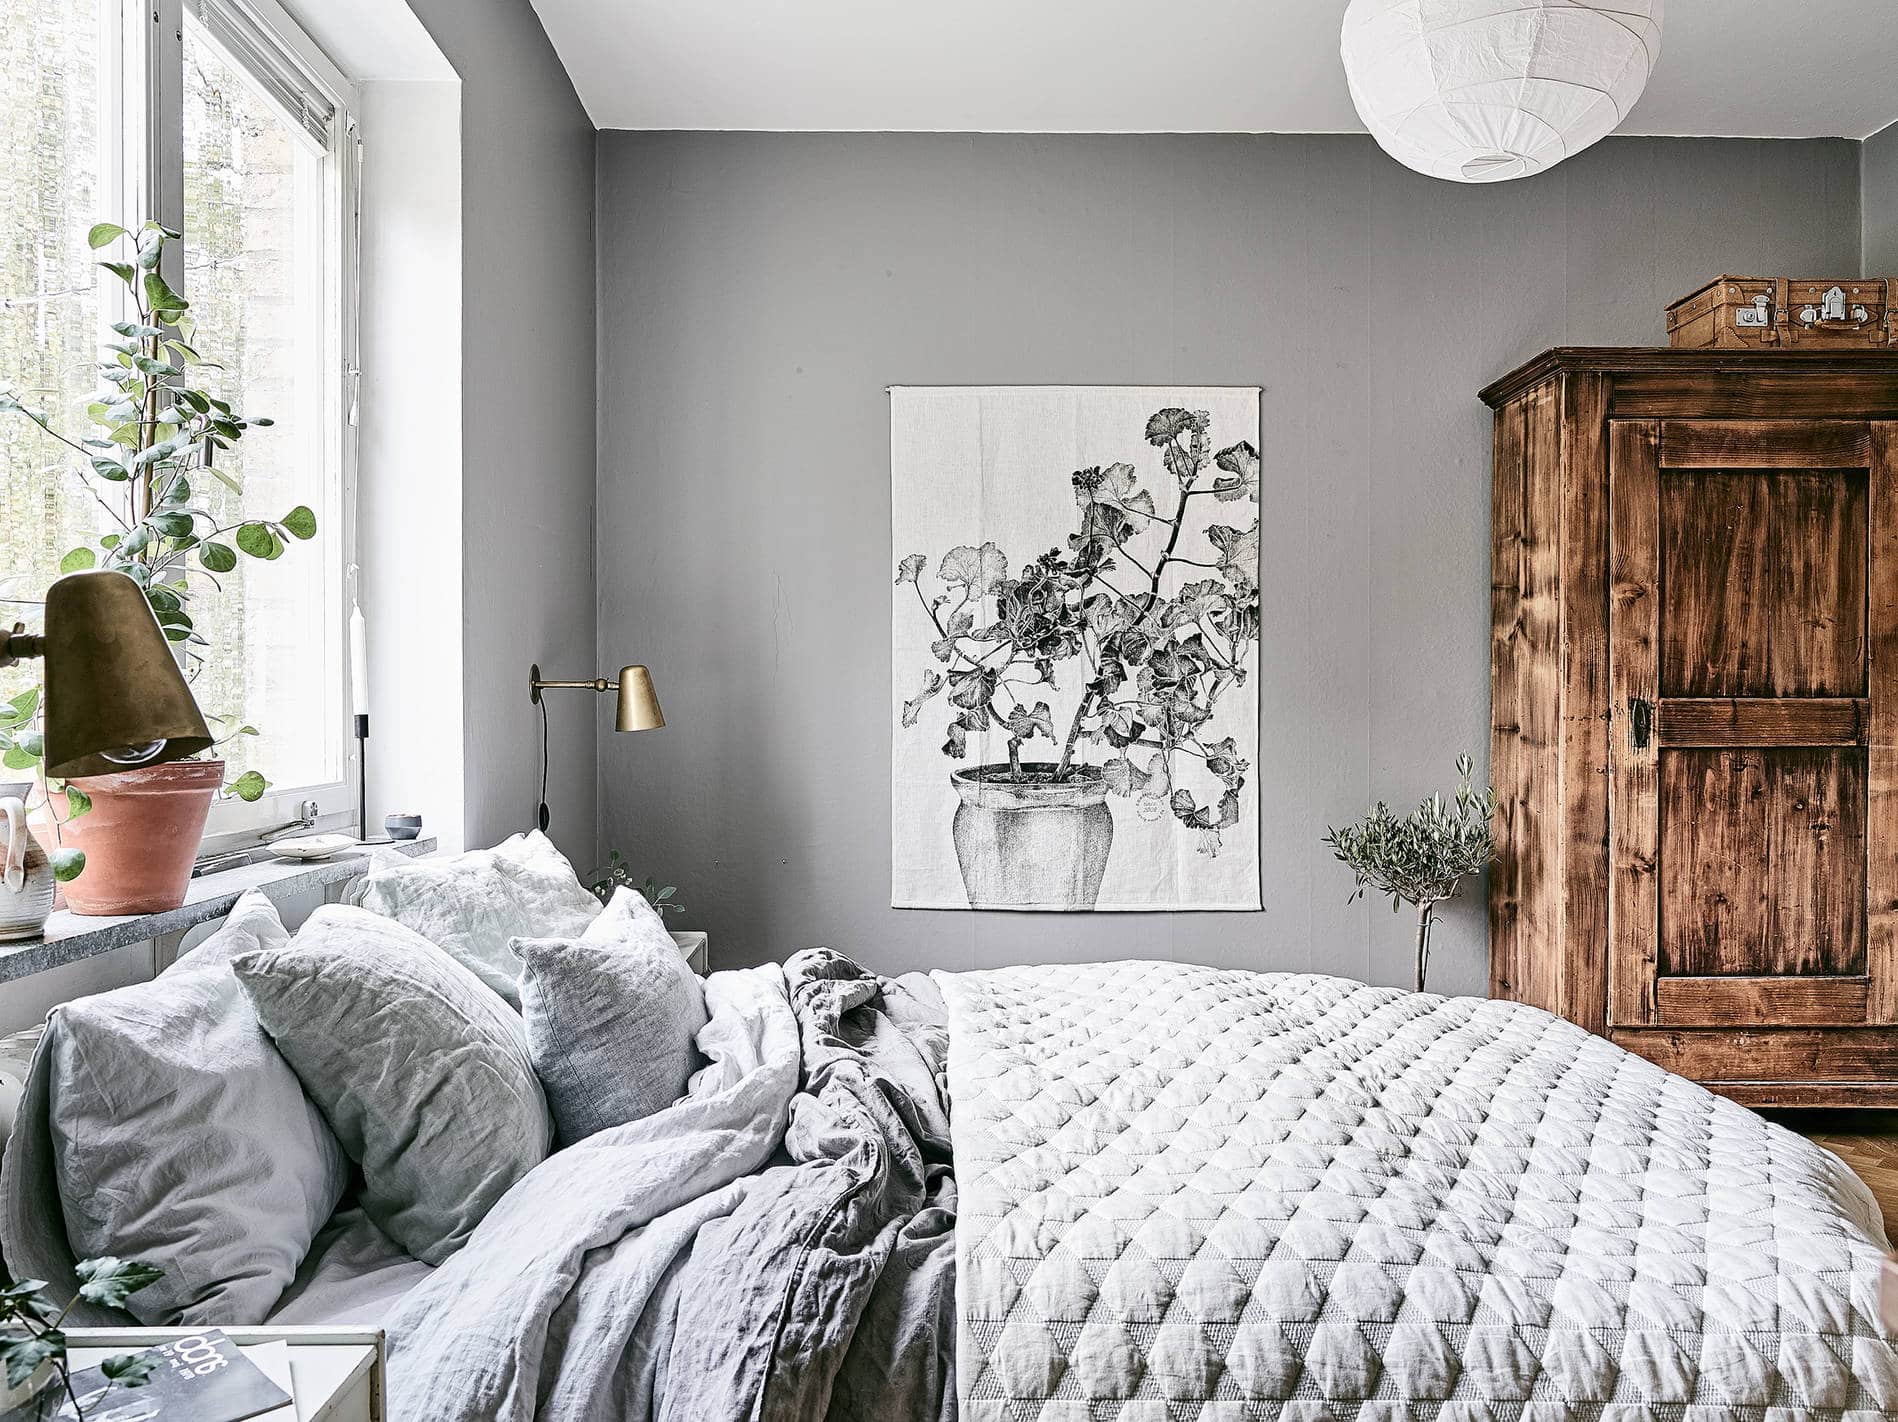 Bedroom Wall Interior Design: Create A Cozy And Inviting Space